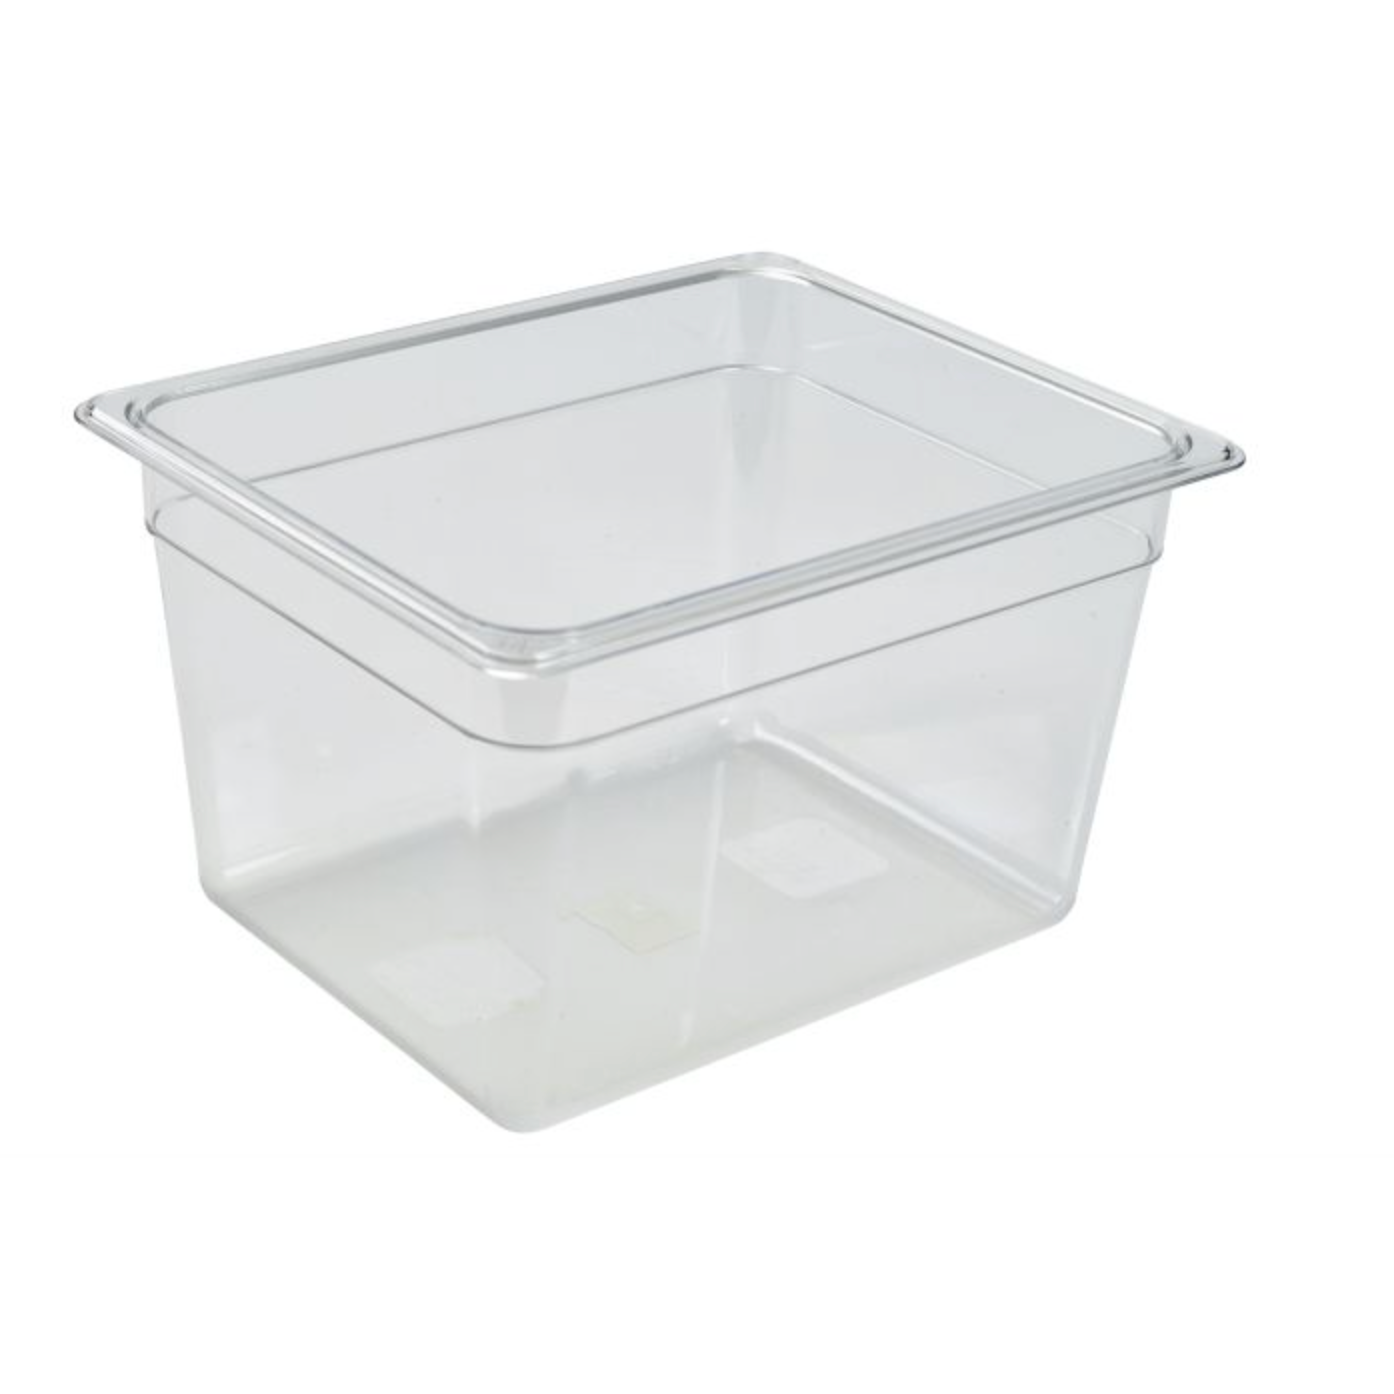 GenWare 1/2 -Polycarbonate GN Pan 200mm Clear